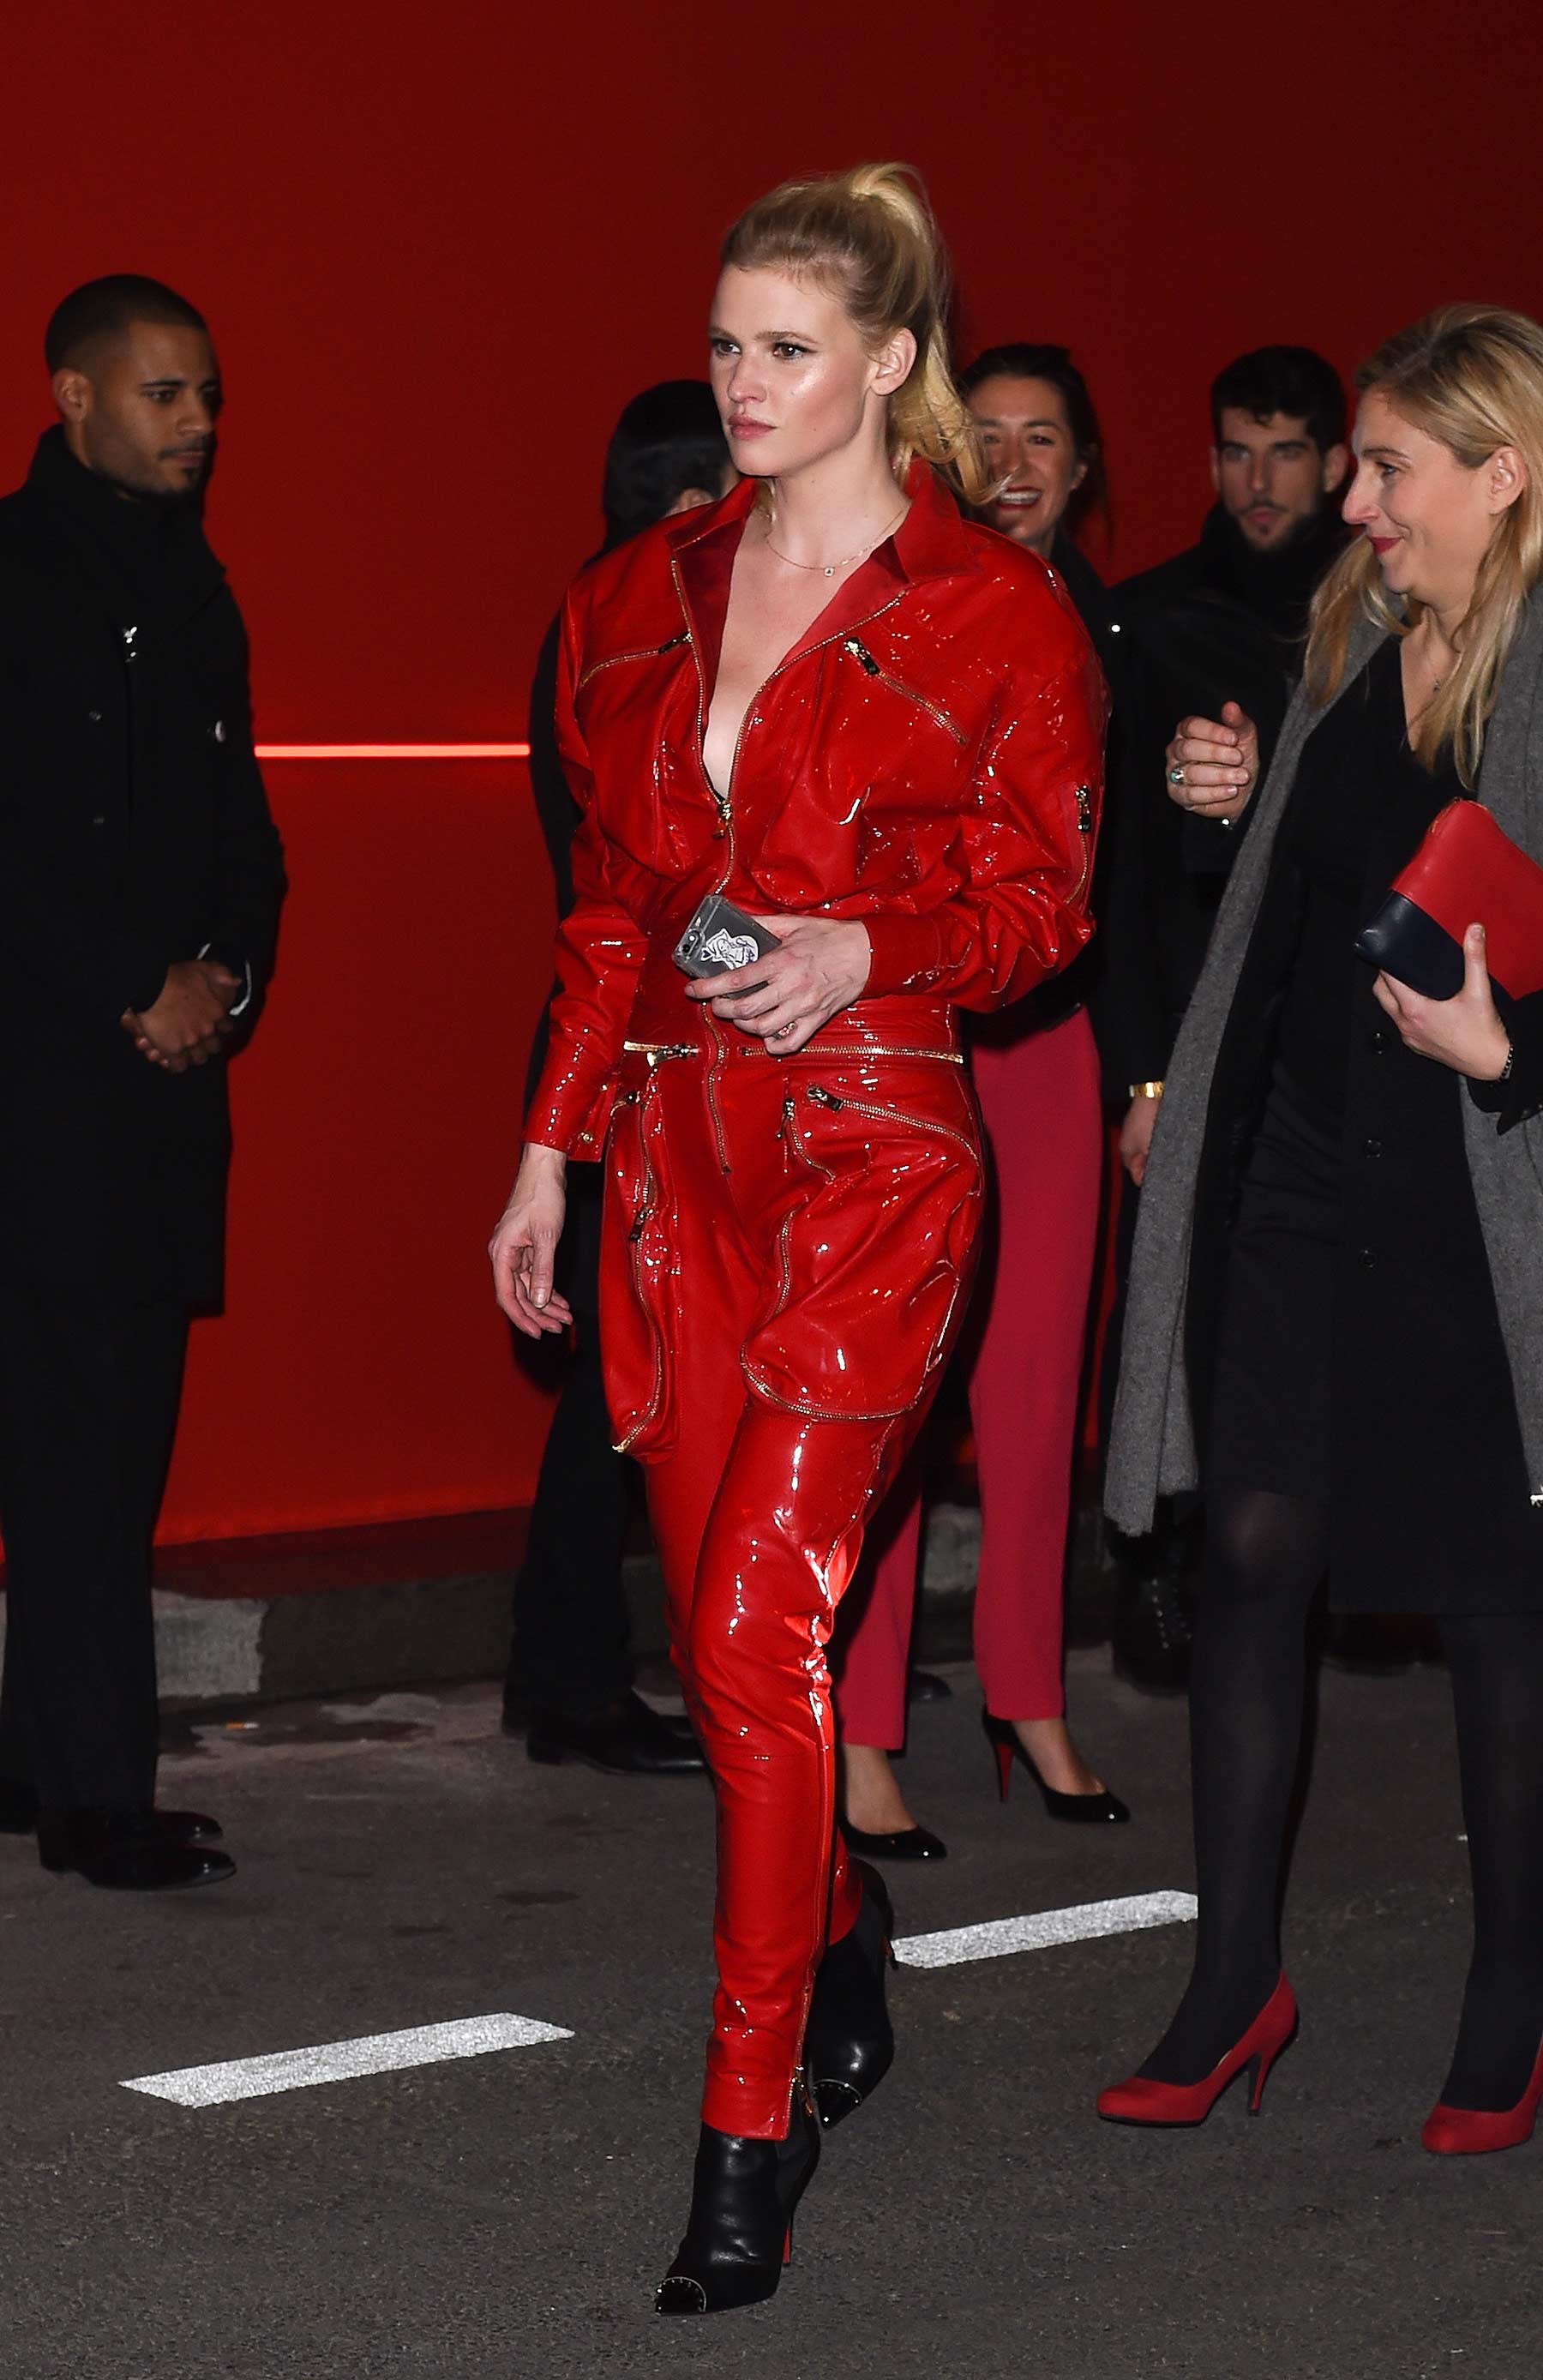 Lara Stone attends L’Oreal Red Obsession party